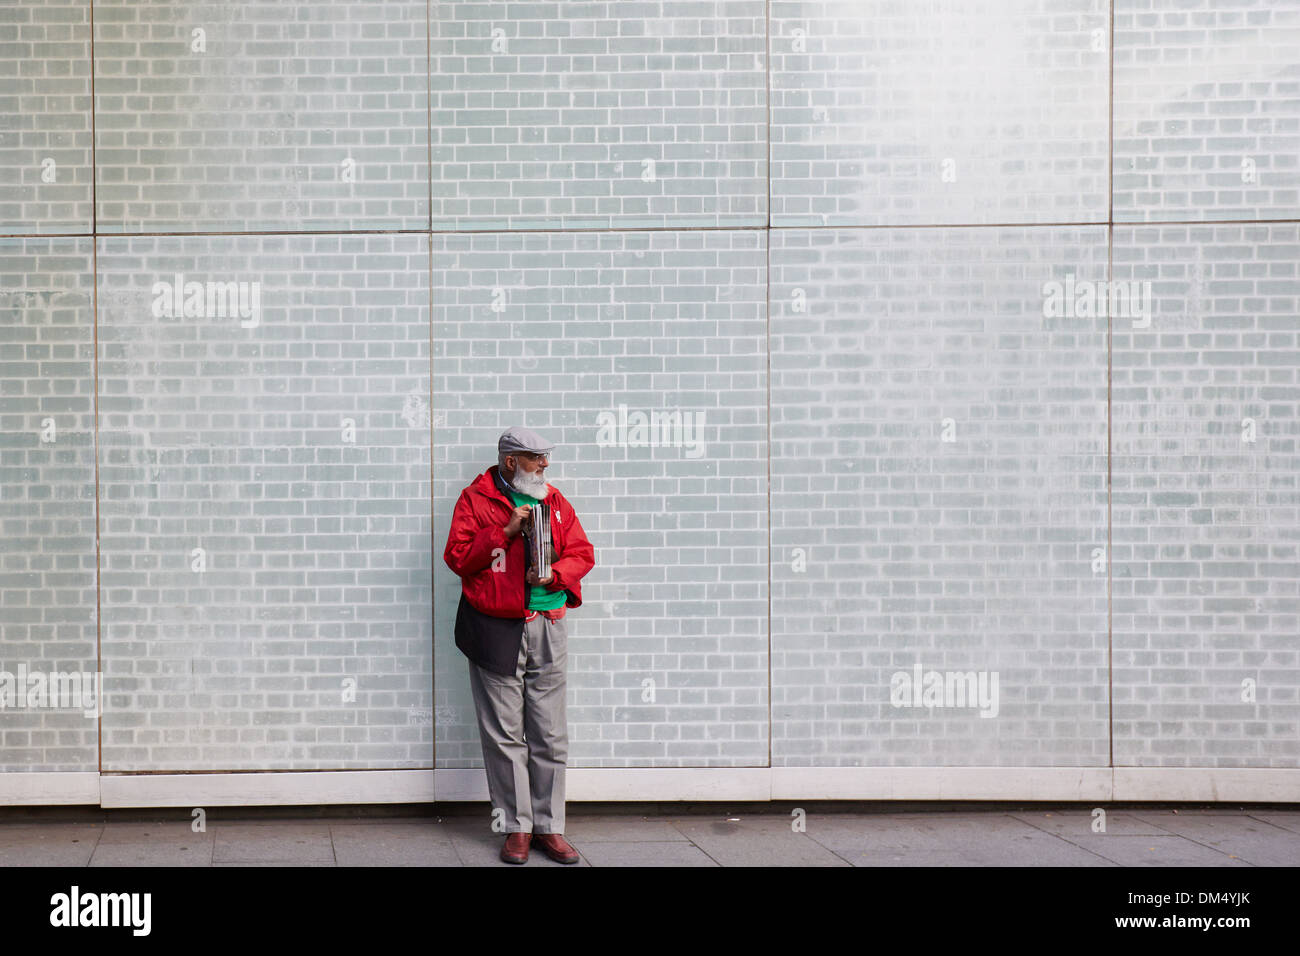 Big issue seller leaning against a wall in an underpass near Waterloo Station Stock Photo